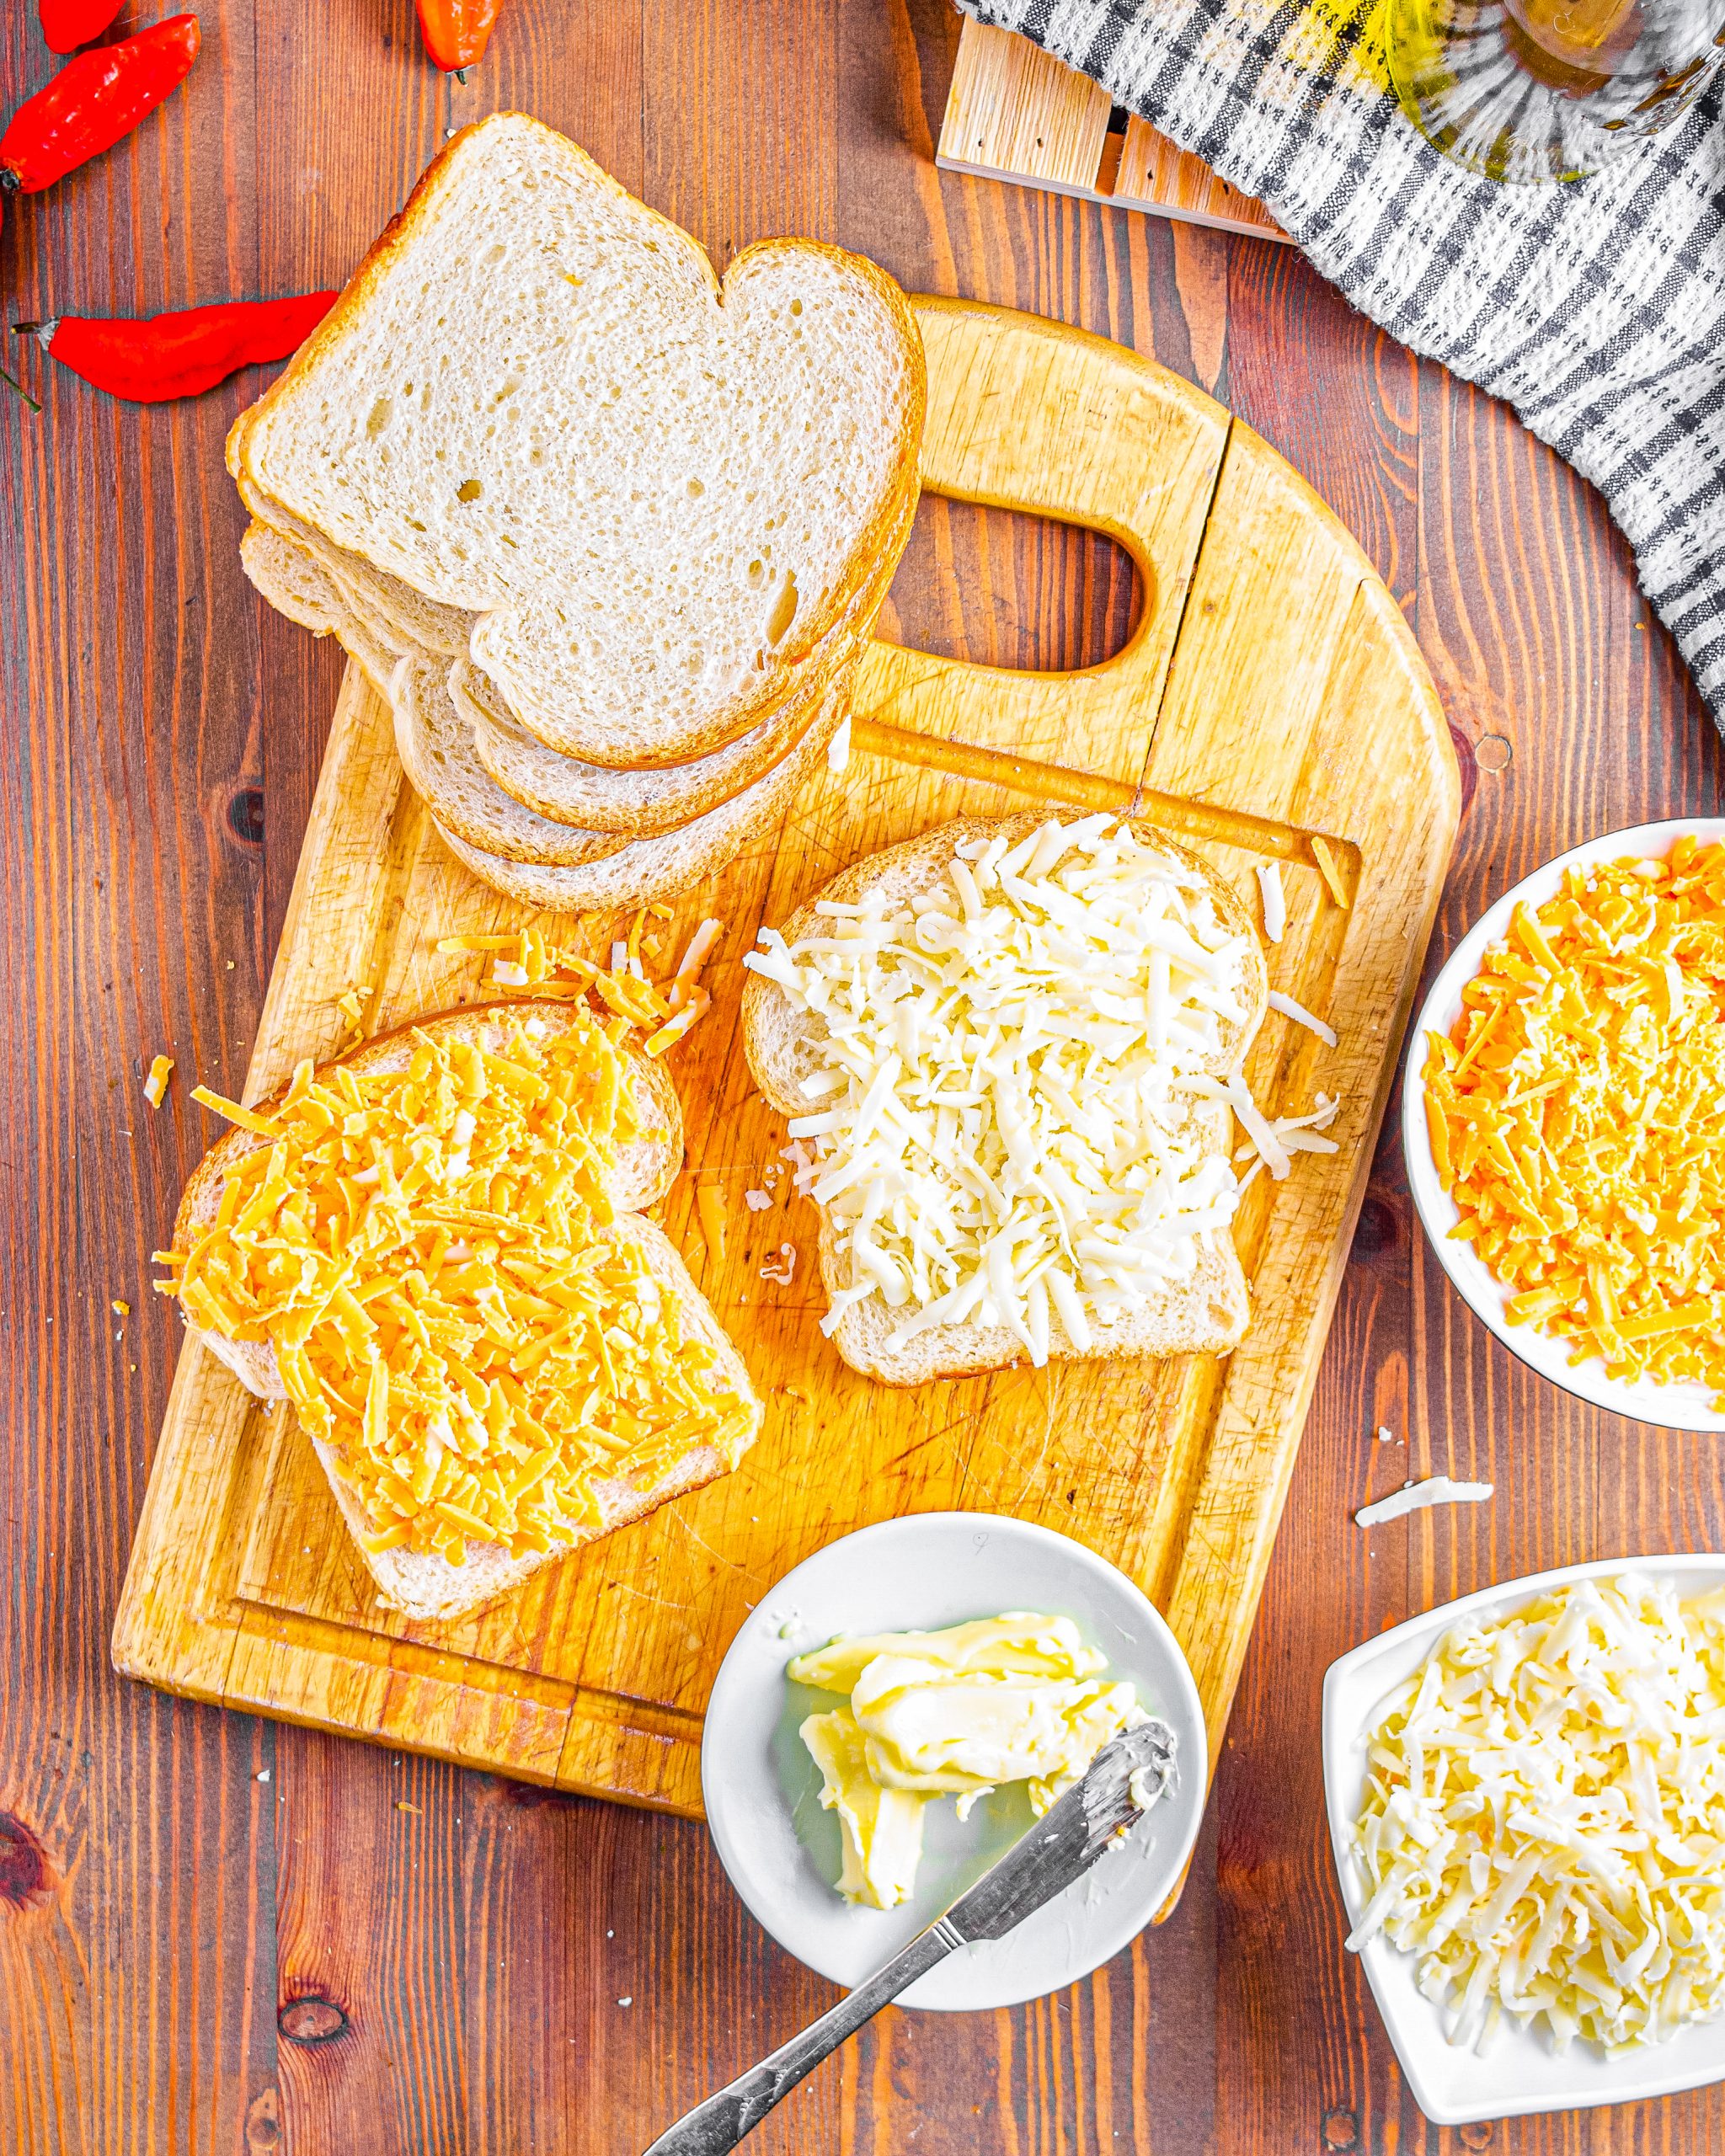 Add cheddar cheese to one of the slices of bread.